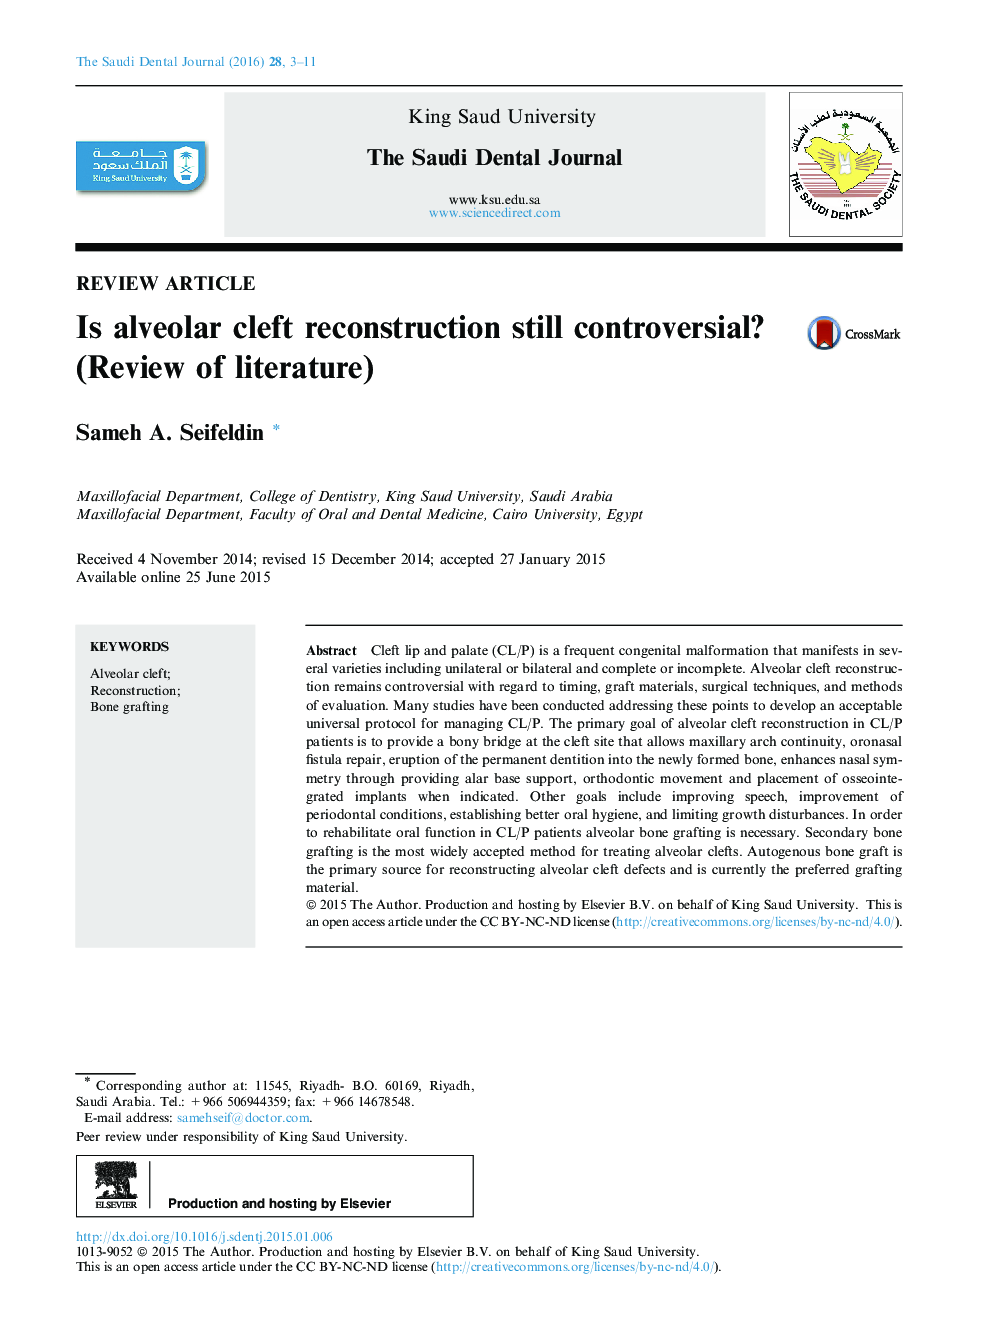 Is alveolar cleft reconstruction still controversial? (Review of literature) 